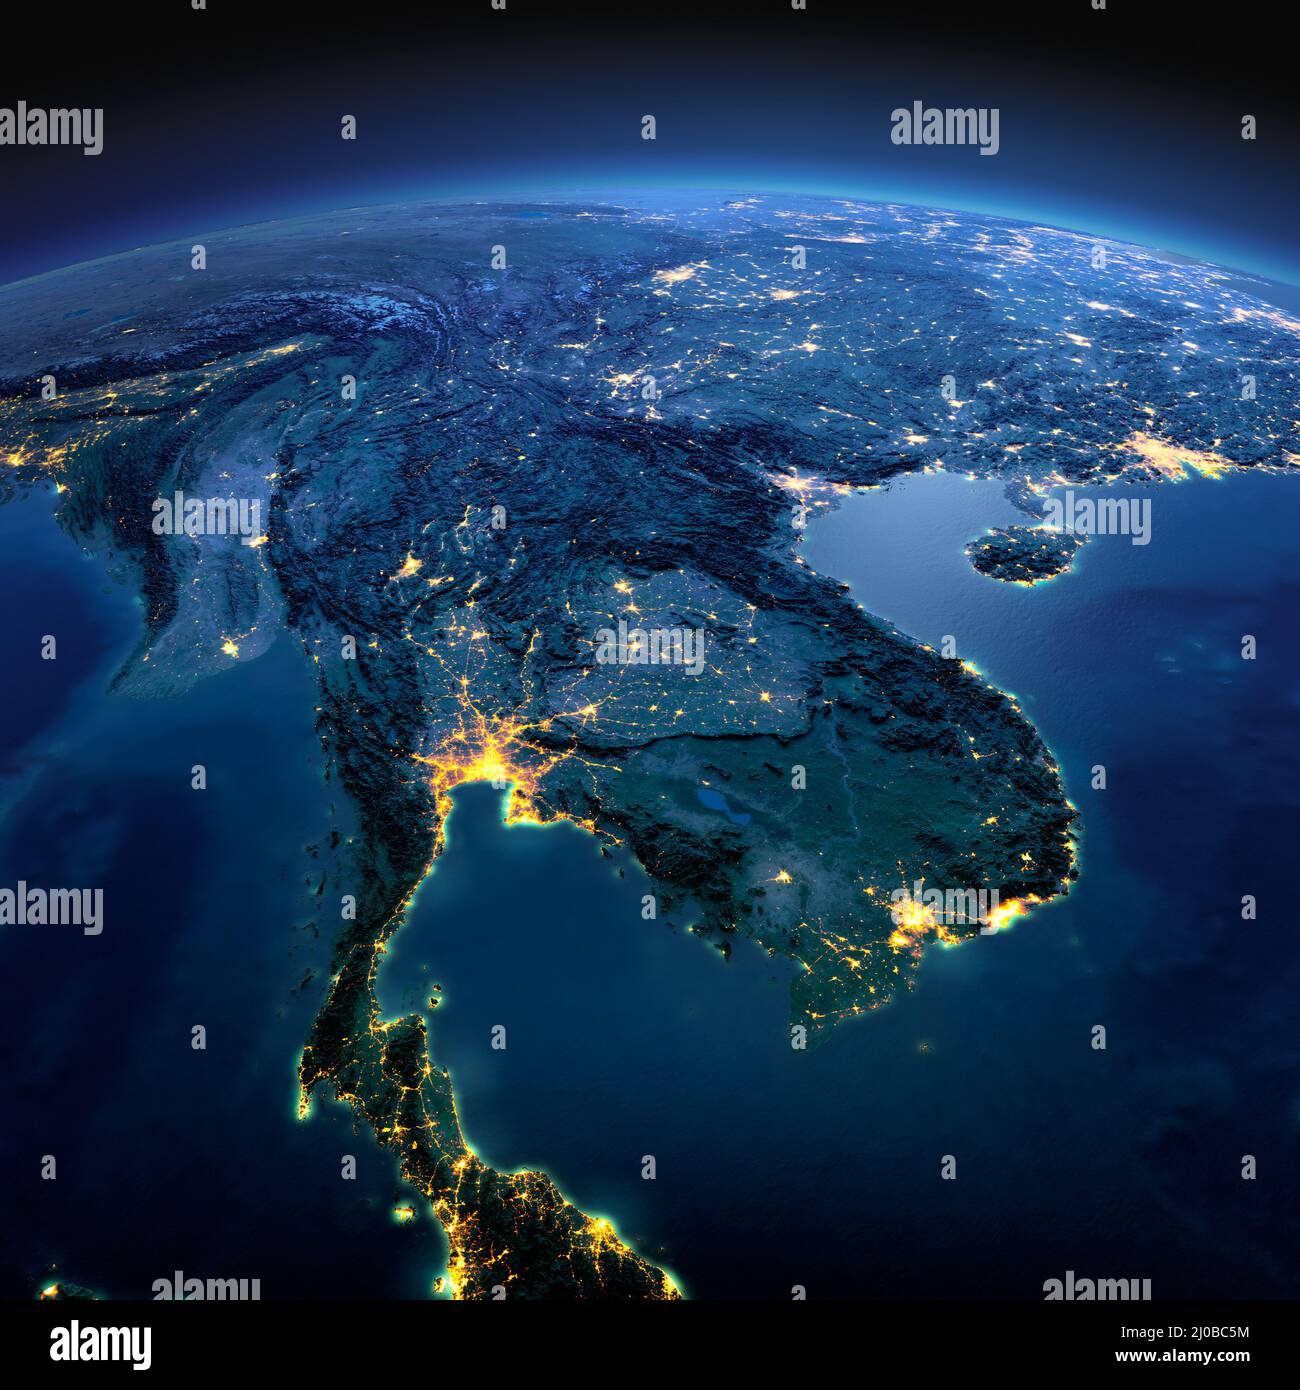 Detailed Earth. Indochina peninsula on a moonlit night Stock Photo